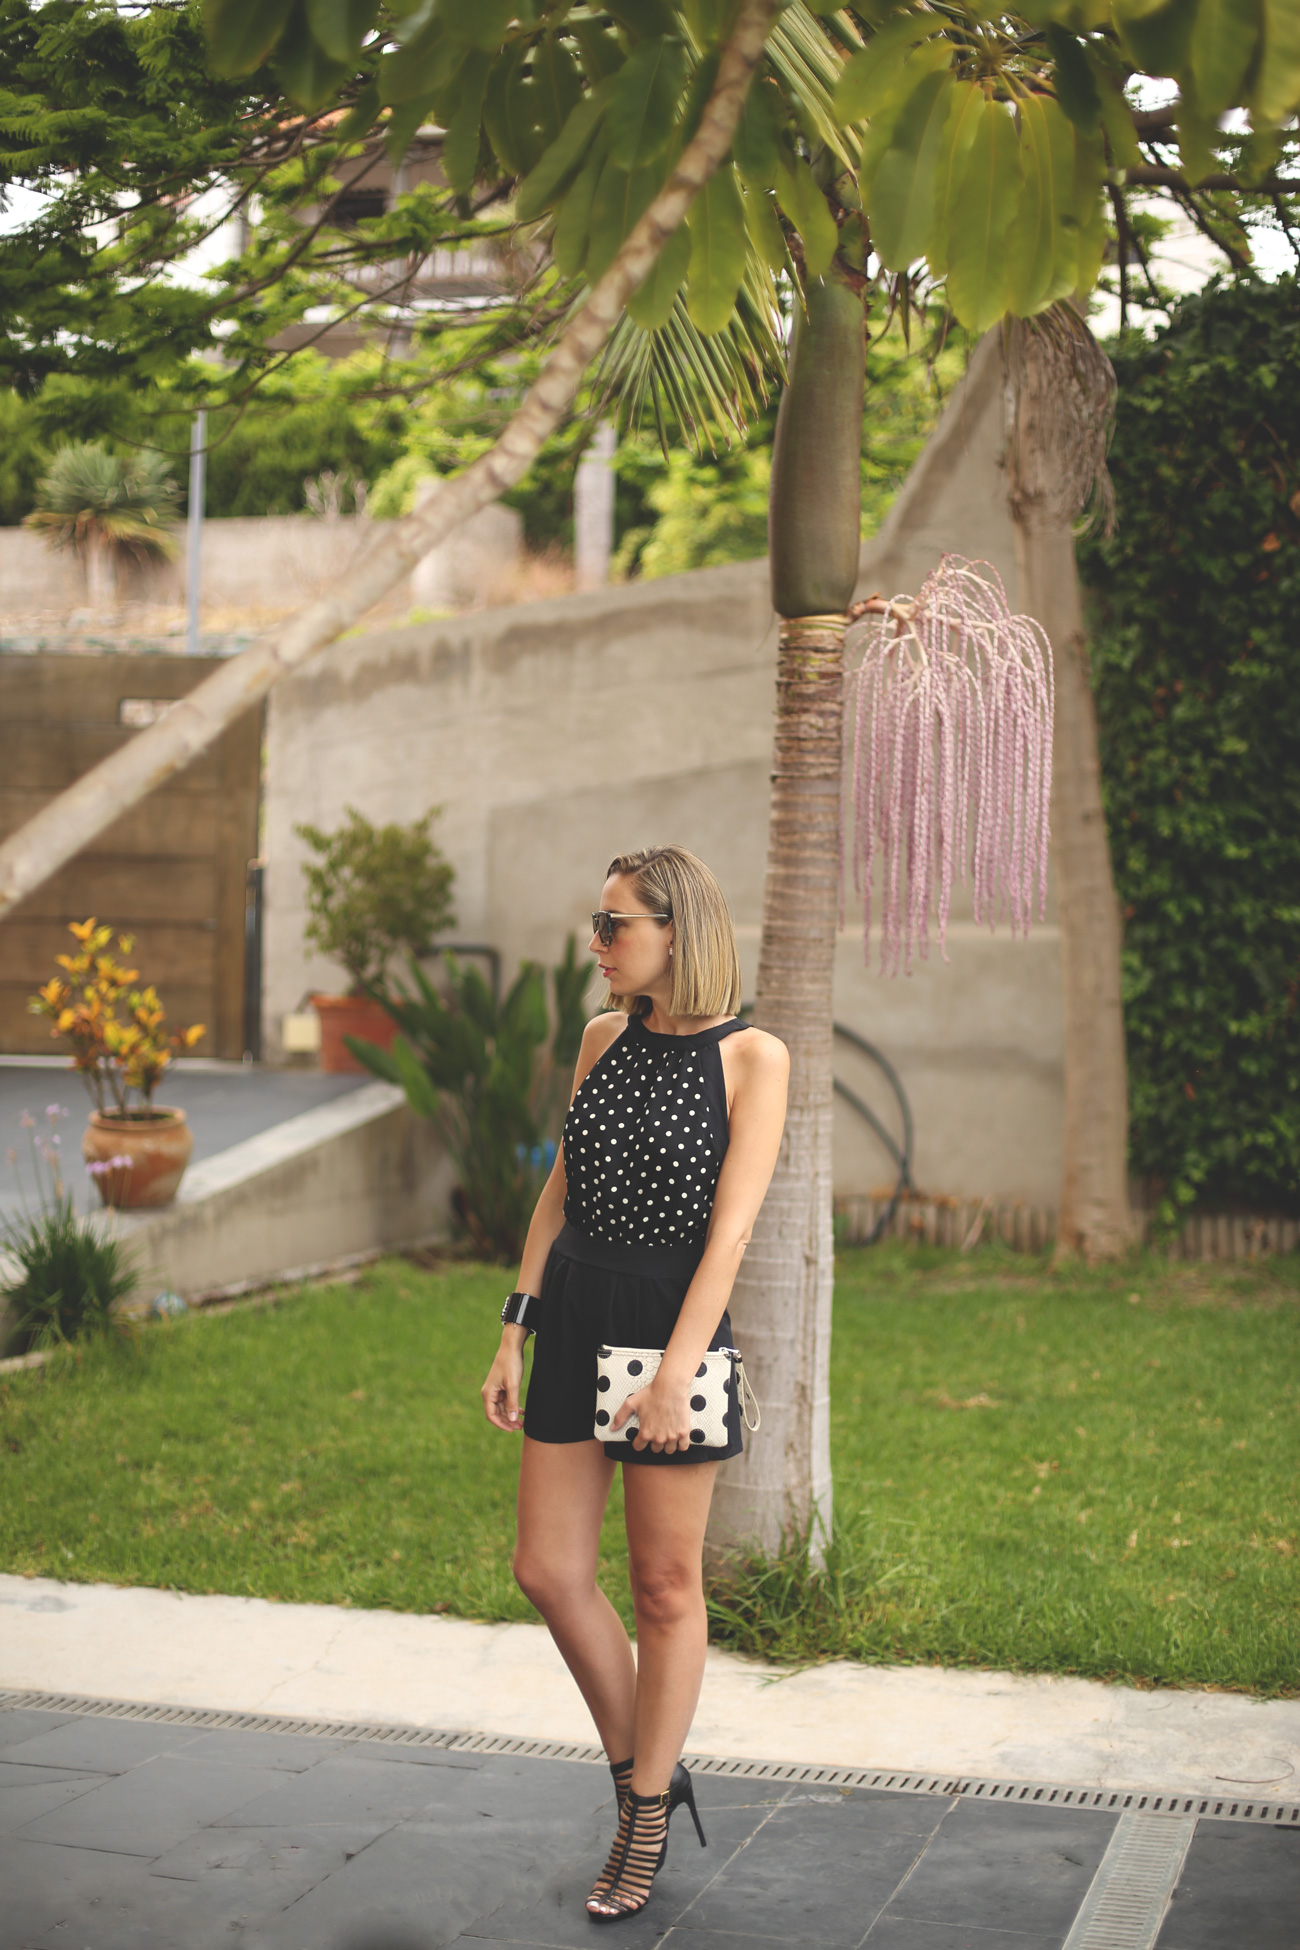 Jumpsuit, Dots print, Marc Jacobs Clutch, Steve Madden, Heels, Black and White, night outfit, summer look, 